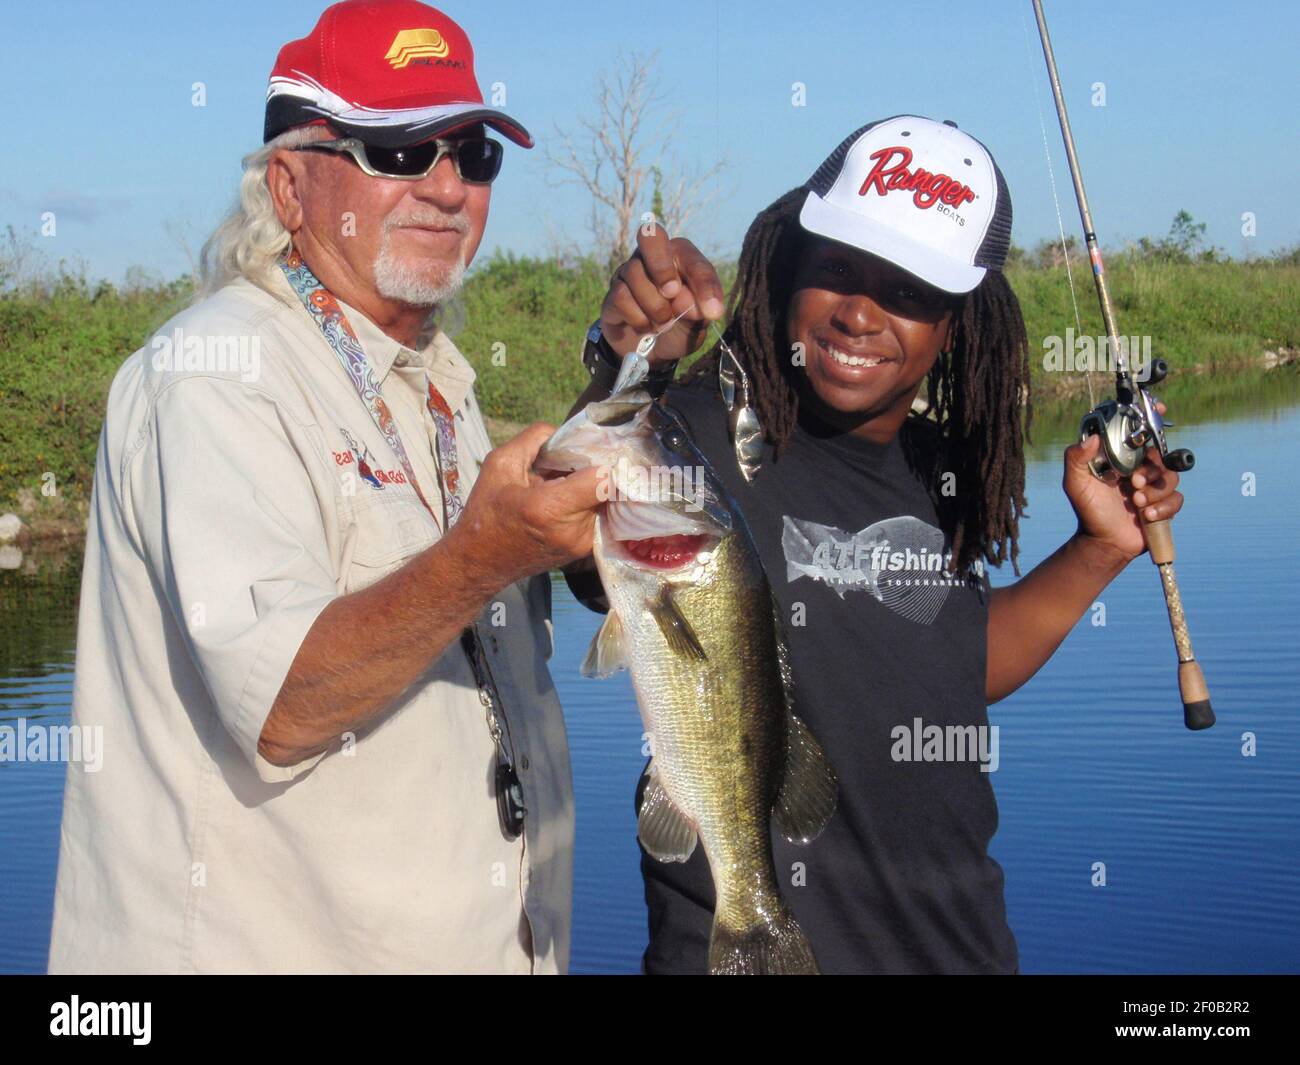 https://c8.alamy.com/comp/2F0B2R2/broward-florida-bass-fishermen-billy-bob-crosno-left-and-anthony-hunt-hold-up-an-estimated-two-pound-bass-that-hunt-caught-using-a-new-spinnerbait-hunt-eventually-caught-a-much-larger-fish-on-the-same-bait-photo-by-sue-cockingmiami-heraldmctsipa-usa-2F0B2R2.jpg